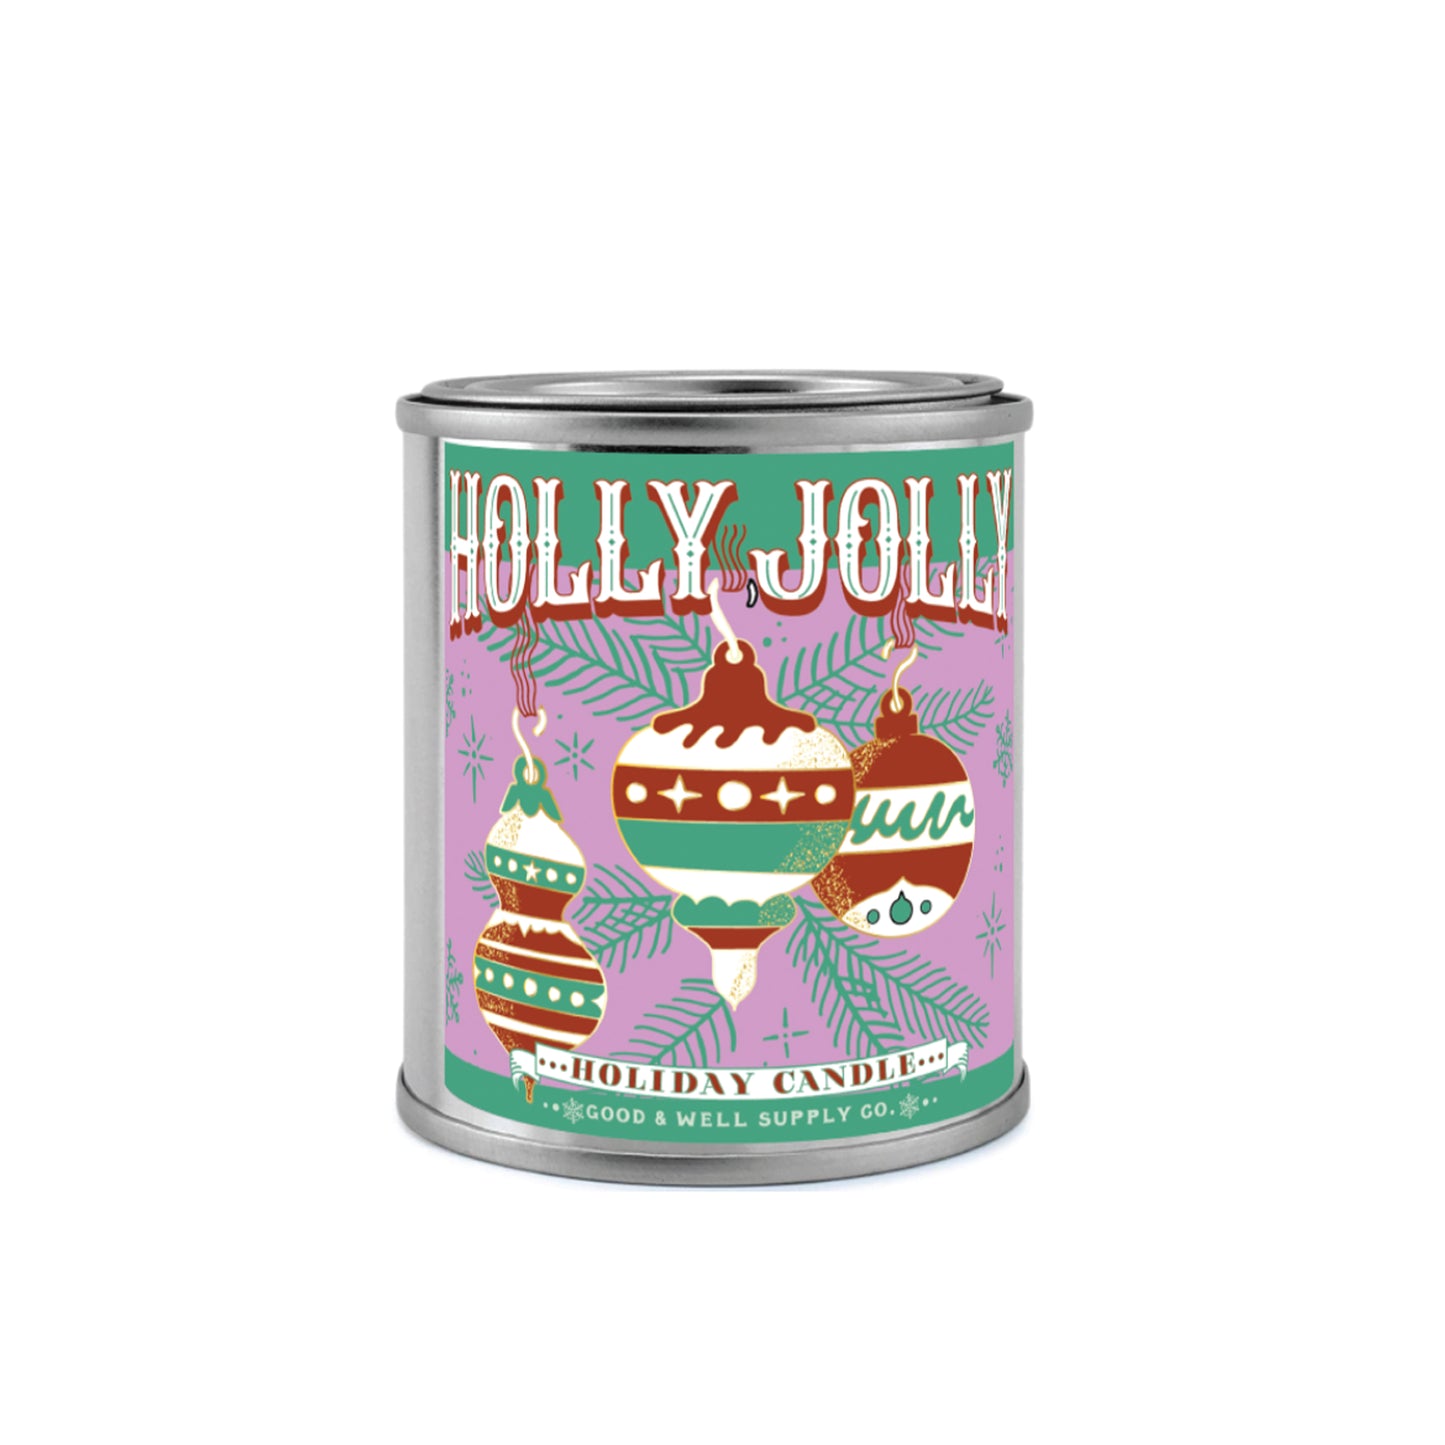 Holly Jolly Holiday Candle 8oz